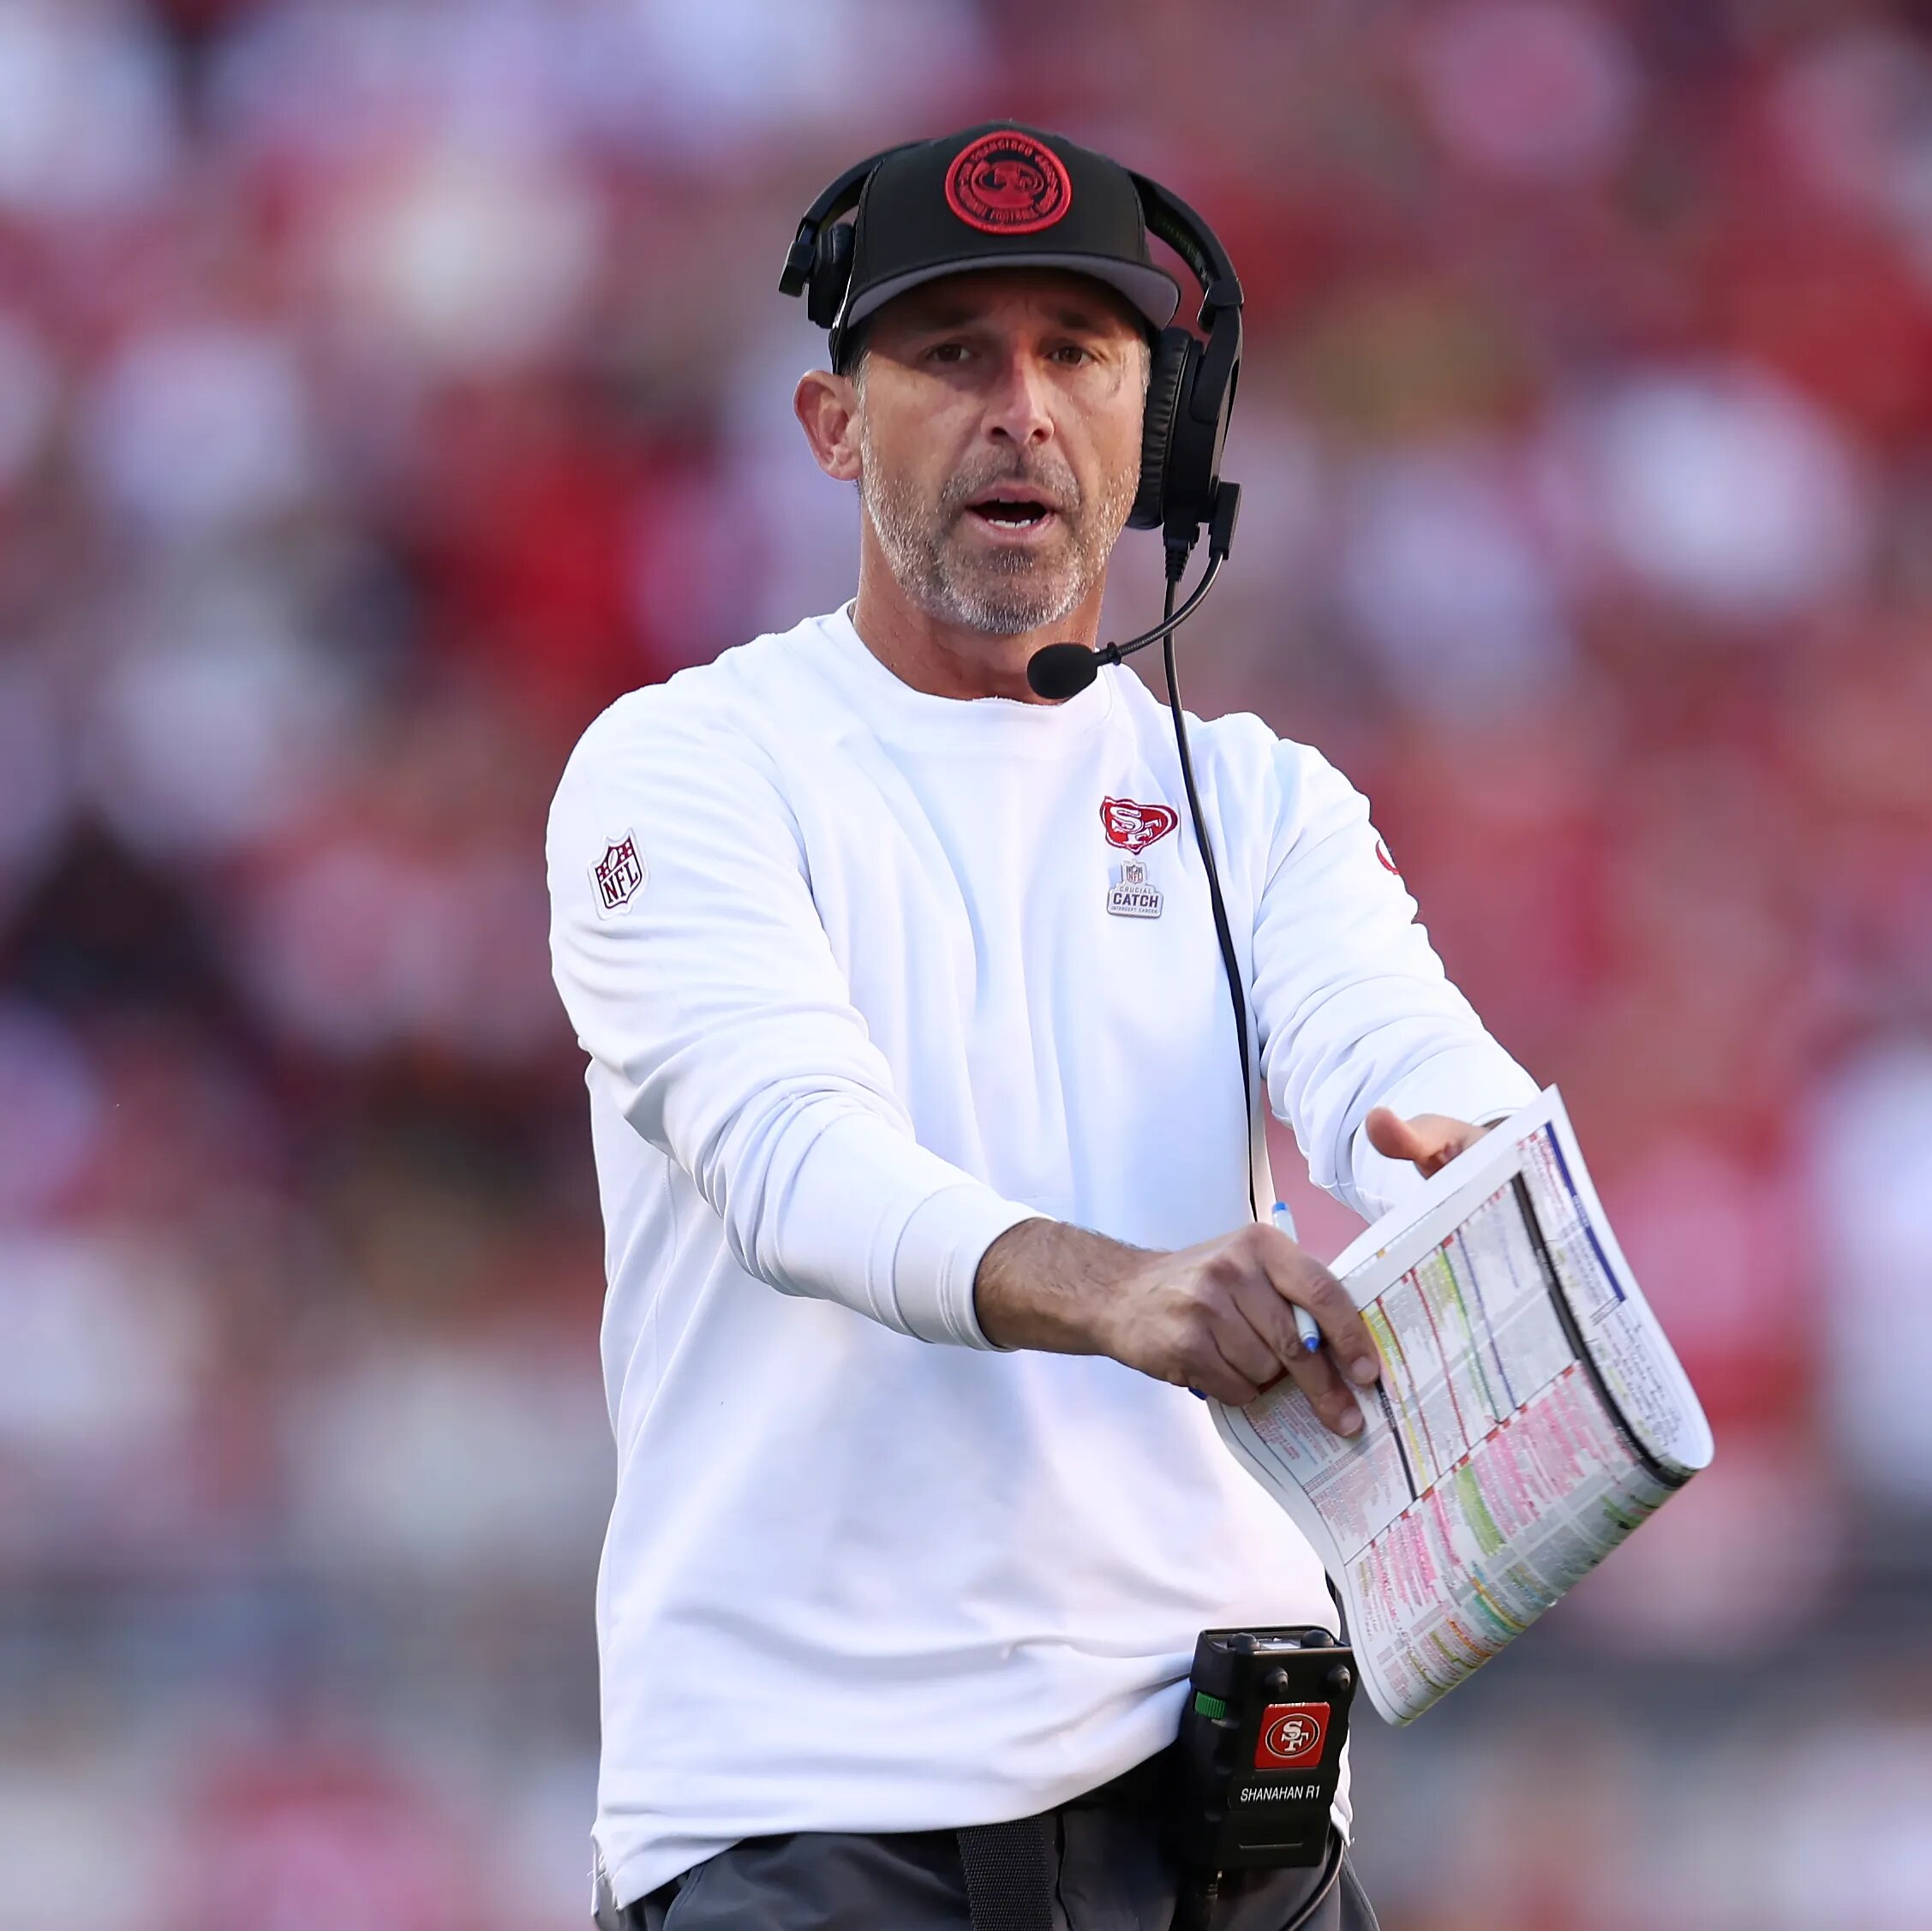 Sad news: 49ers lose out on their target to sign NFL Draft WR